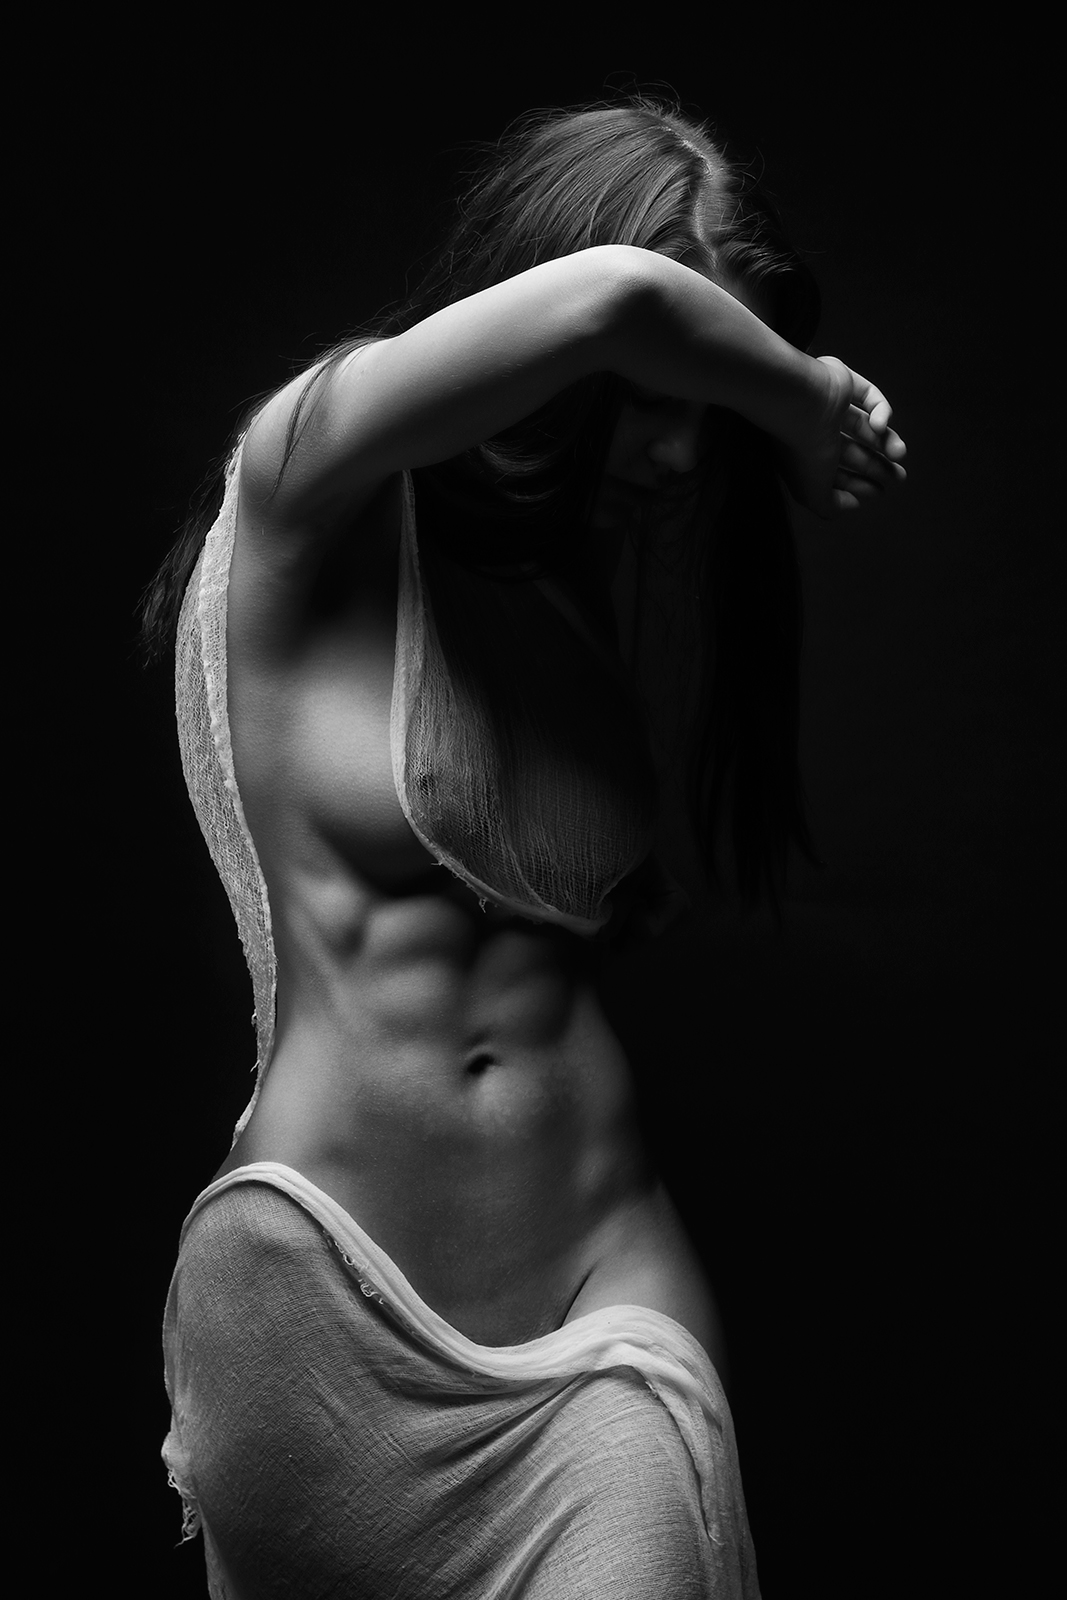 ladies, white, female, skin, sensuality, feminine, muscular, girl, glamour, erotic, fashion, model, sensual, naked, attractive, nude, adult, sexy, woman, training, wellness, asana, concentration, meditation, activity, fit, relaxation, workout, gym, sporti, Беловодченко Антон